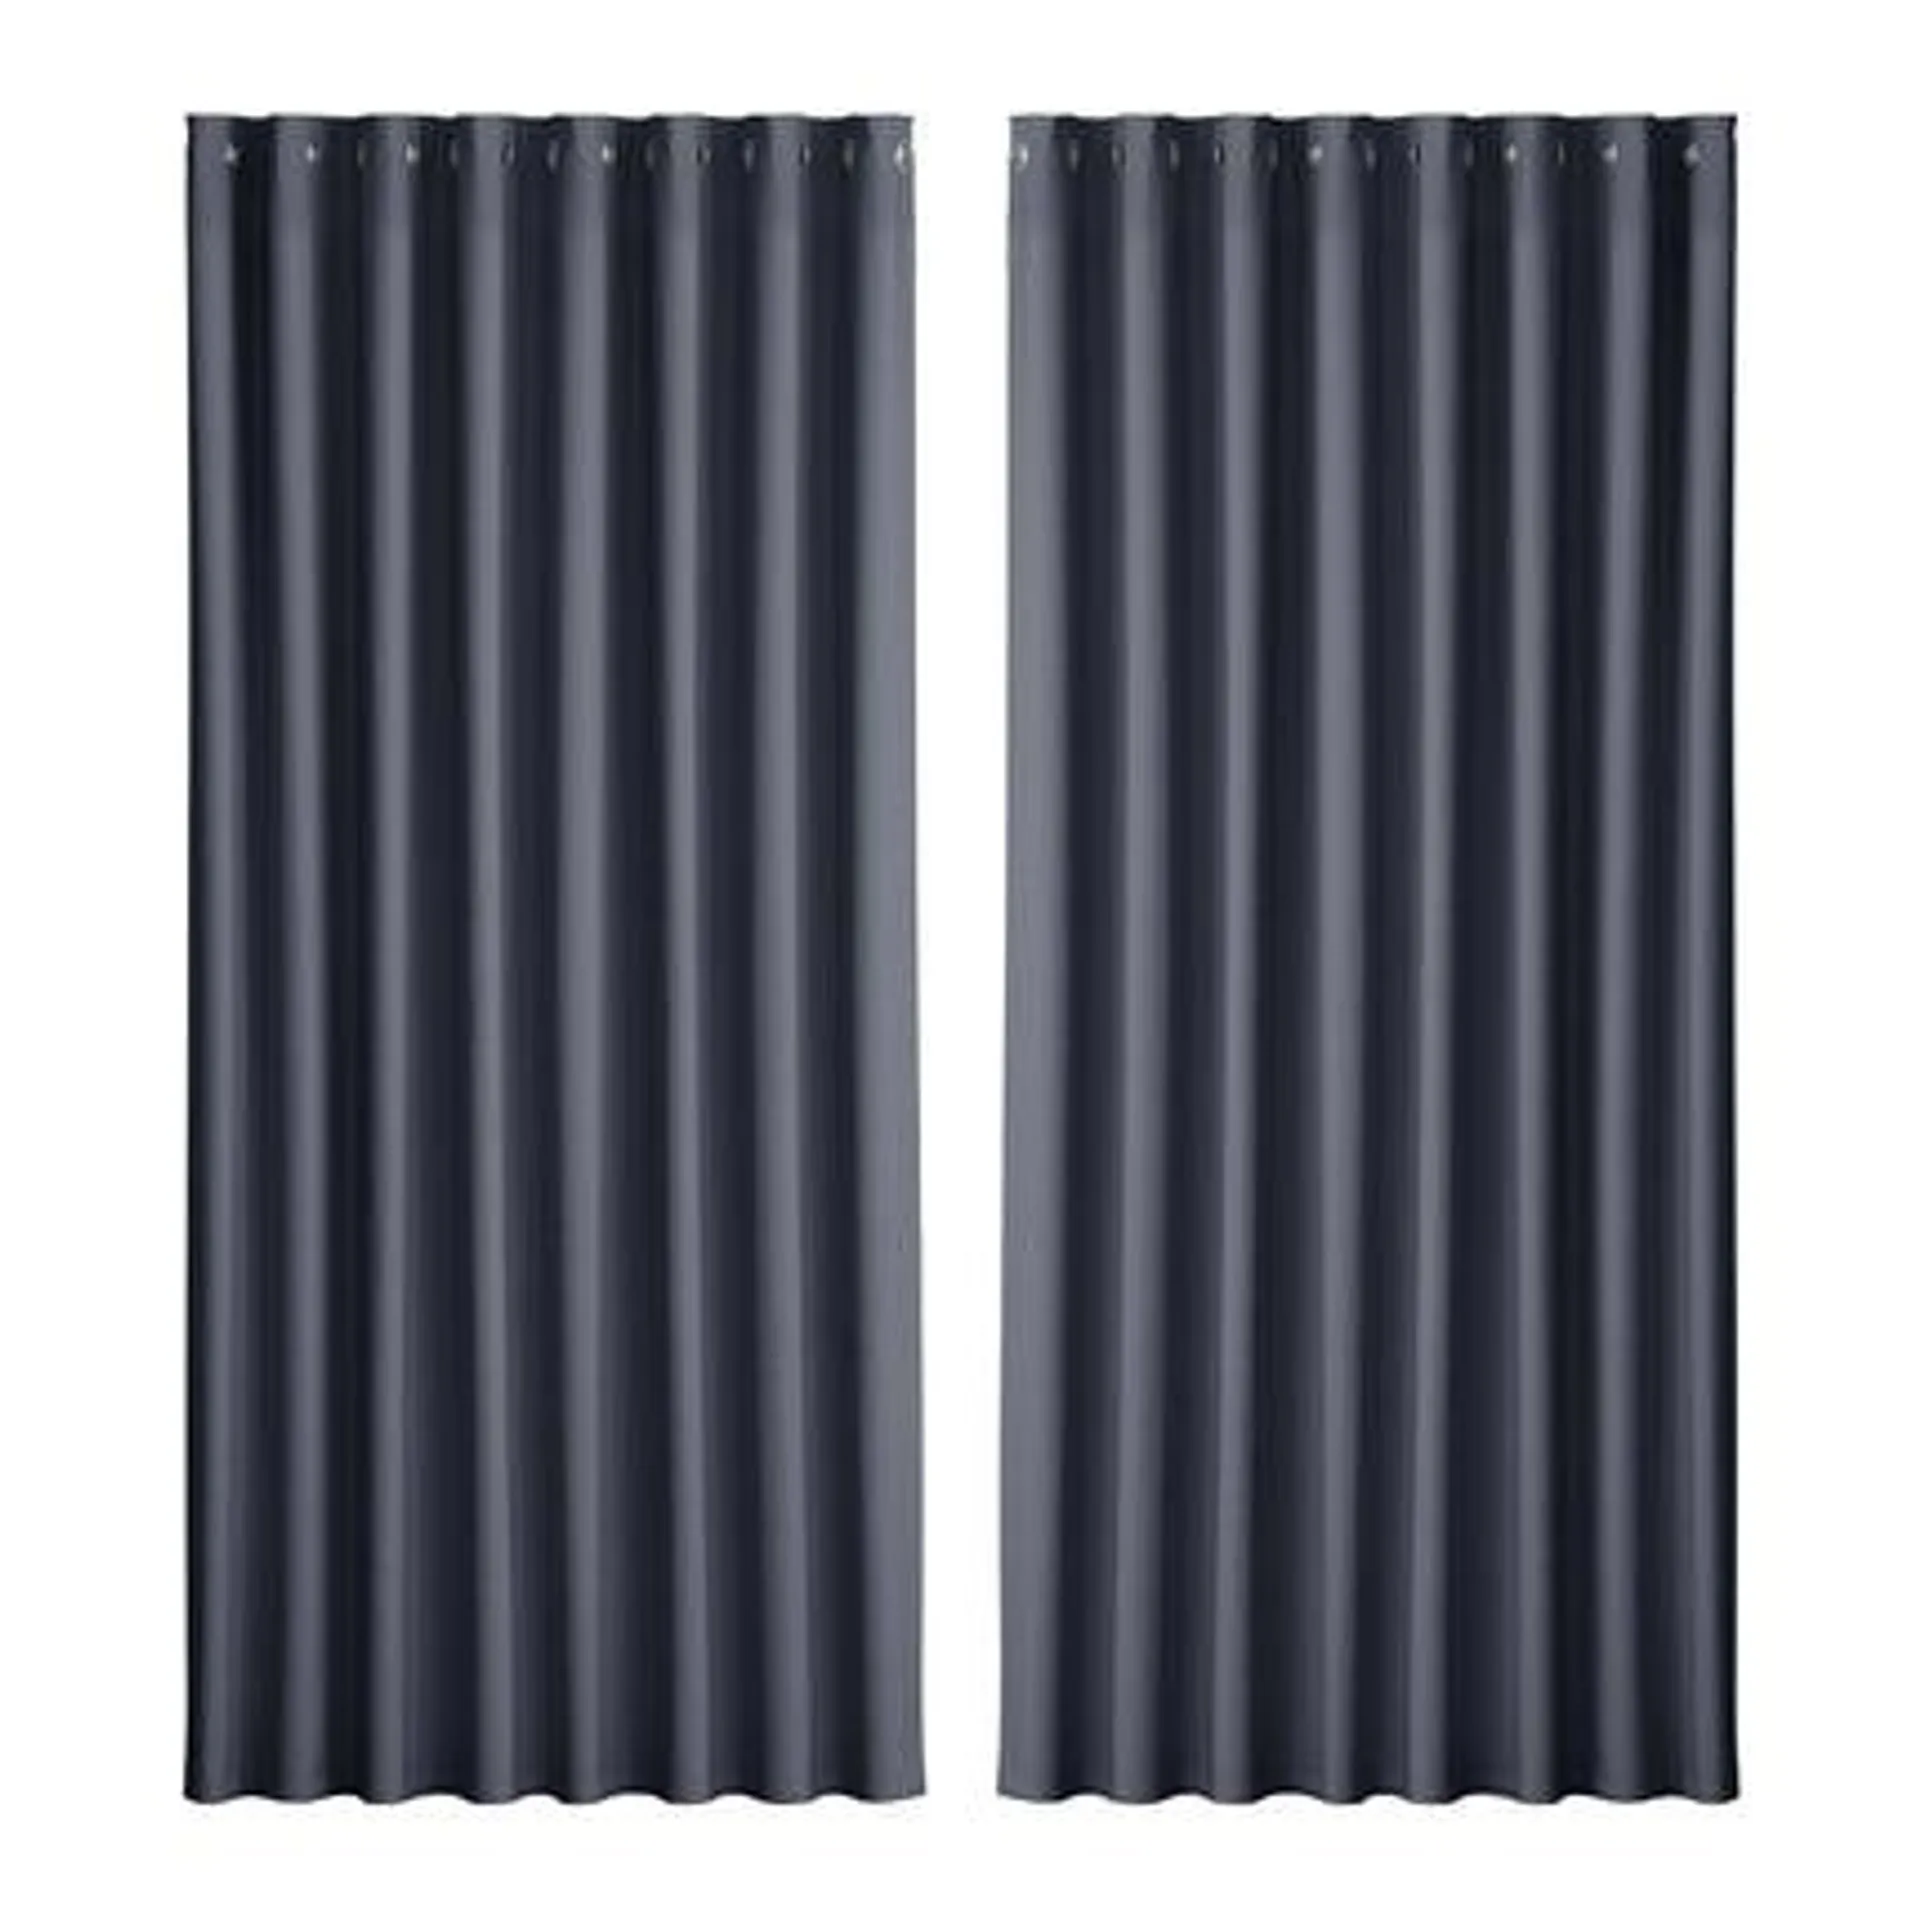 2X Blockout Curtains Blackout Window Curtain Eyelet 300x230cm Charcoal